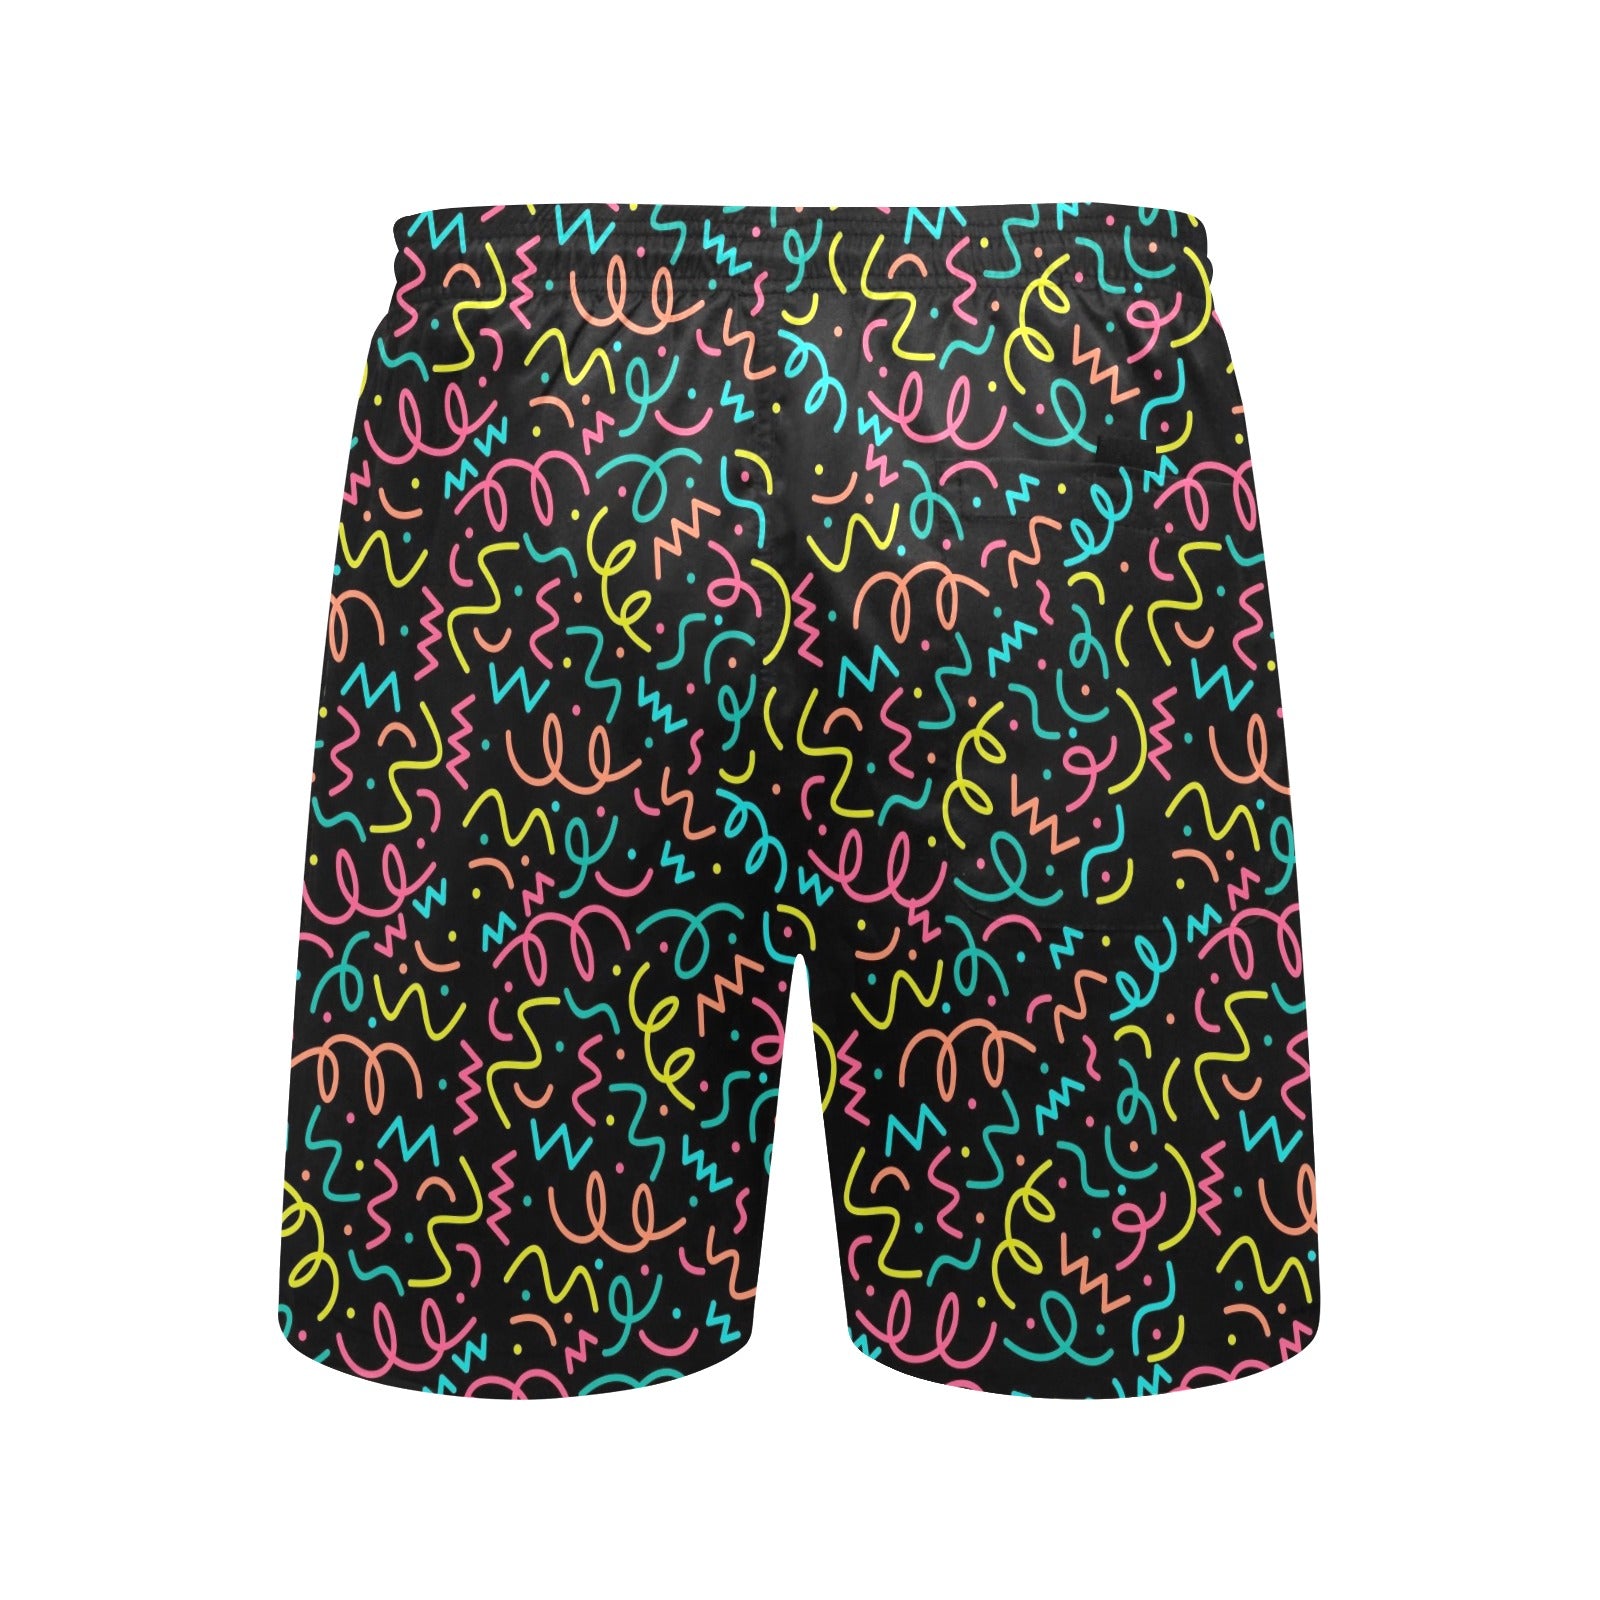 Squiggle Time - Men's Mid-Length Beach Shorts Men's Mid-Length Beach Shorts Funny